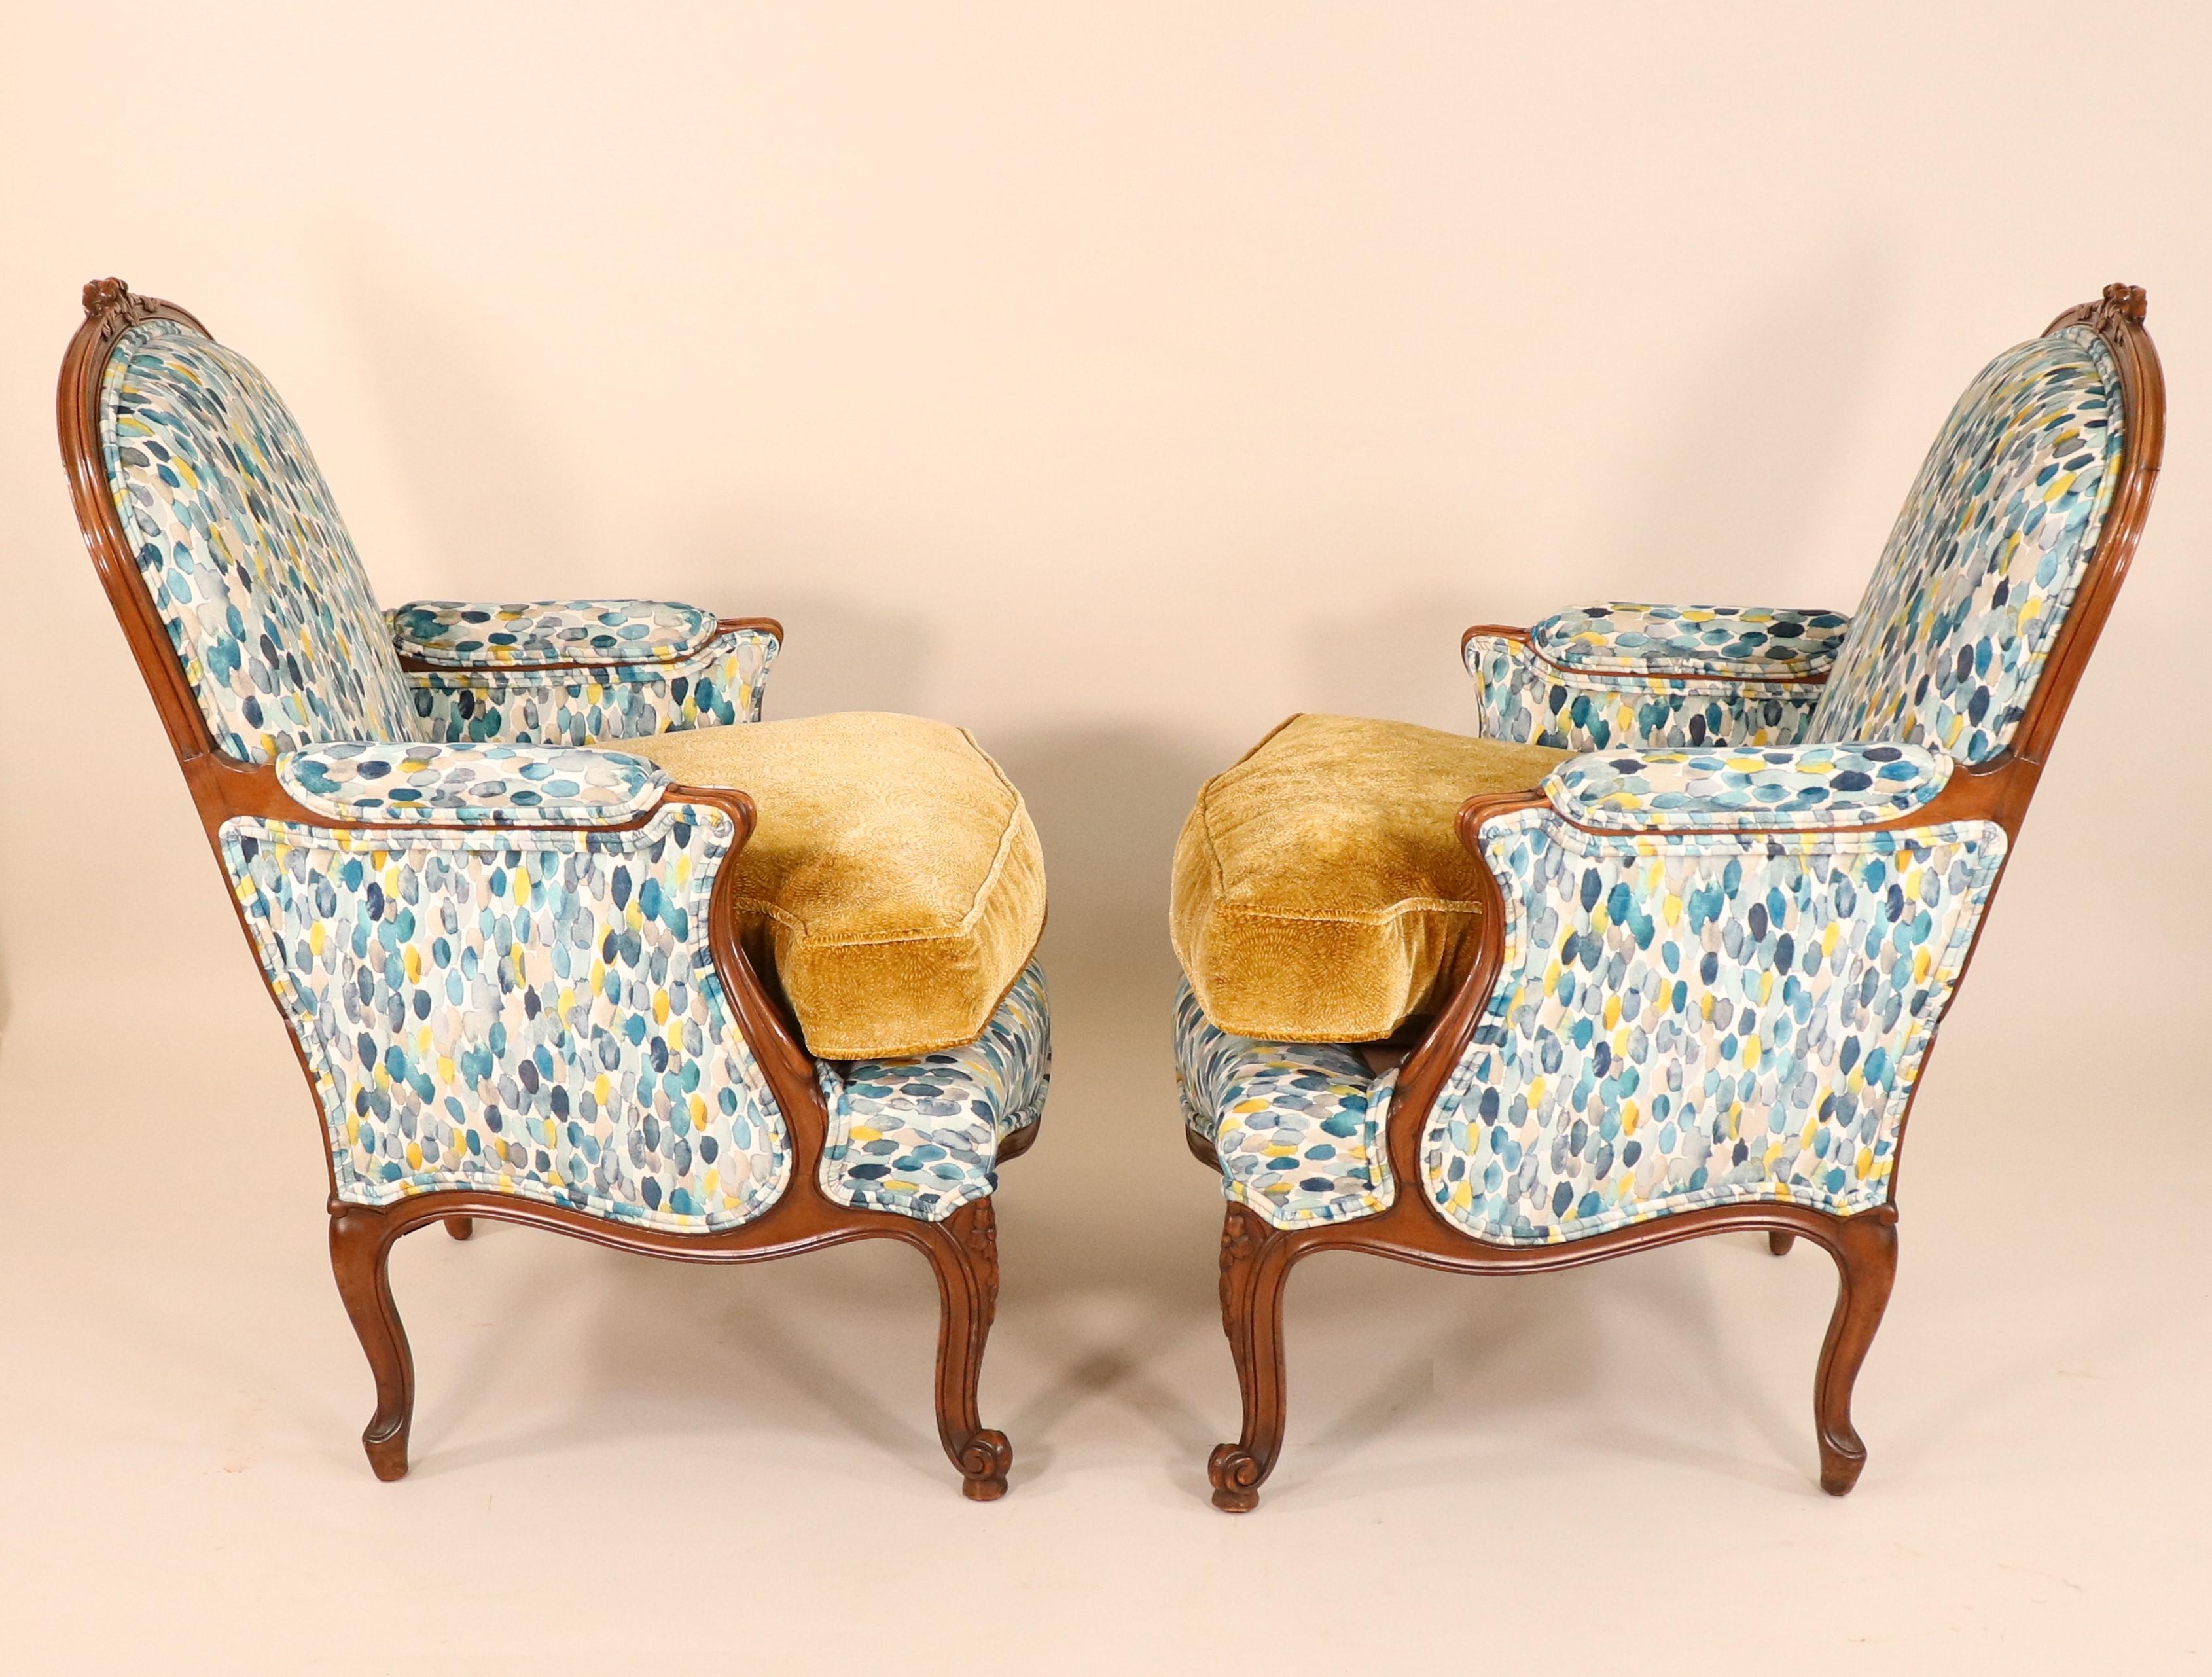 French Pair of Mid-19th Century Louis XV Style Bergère Armchairs with Modern Fabrics For Sale